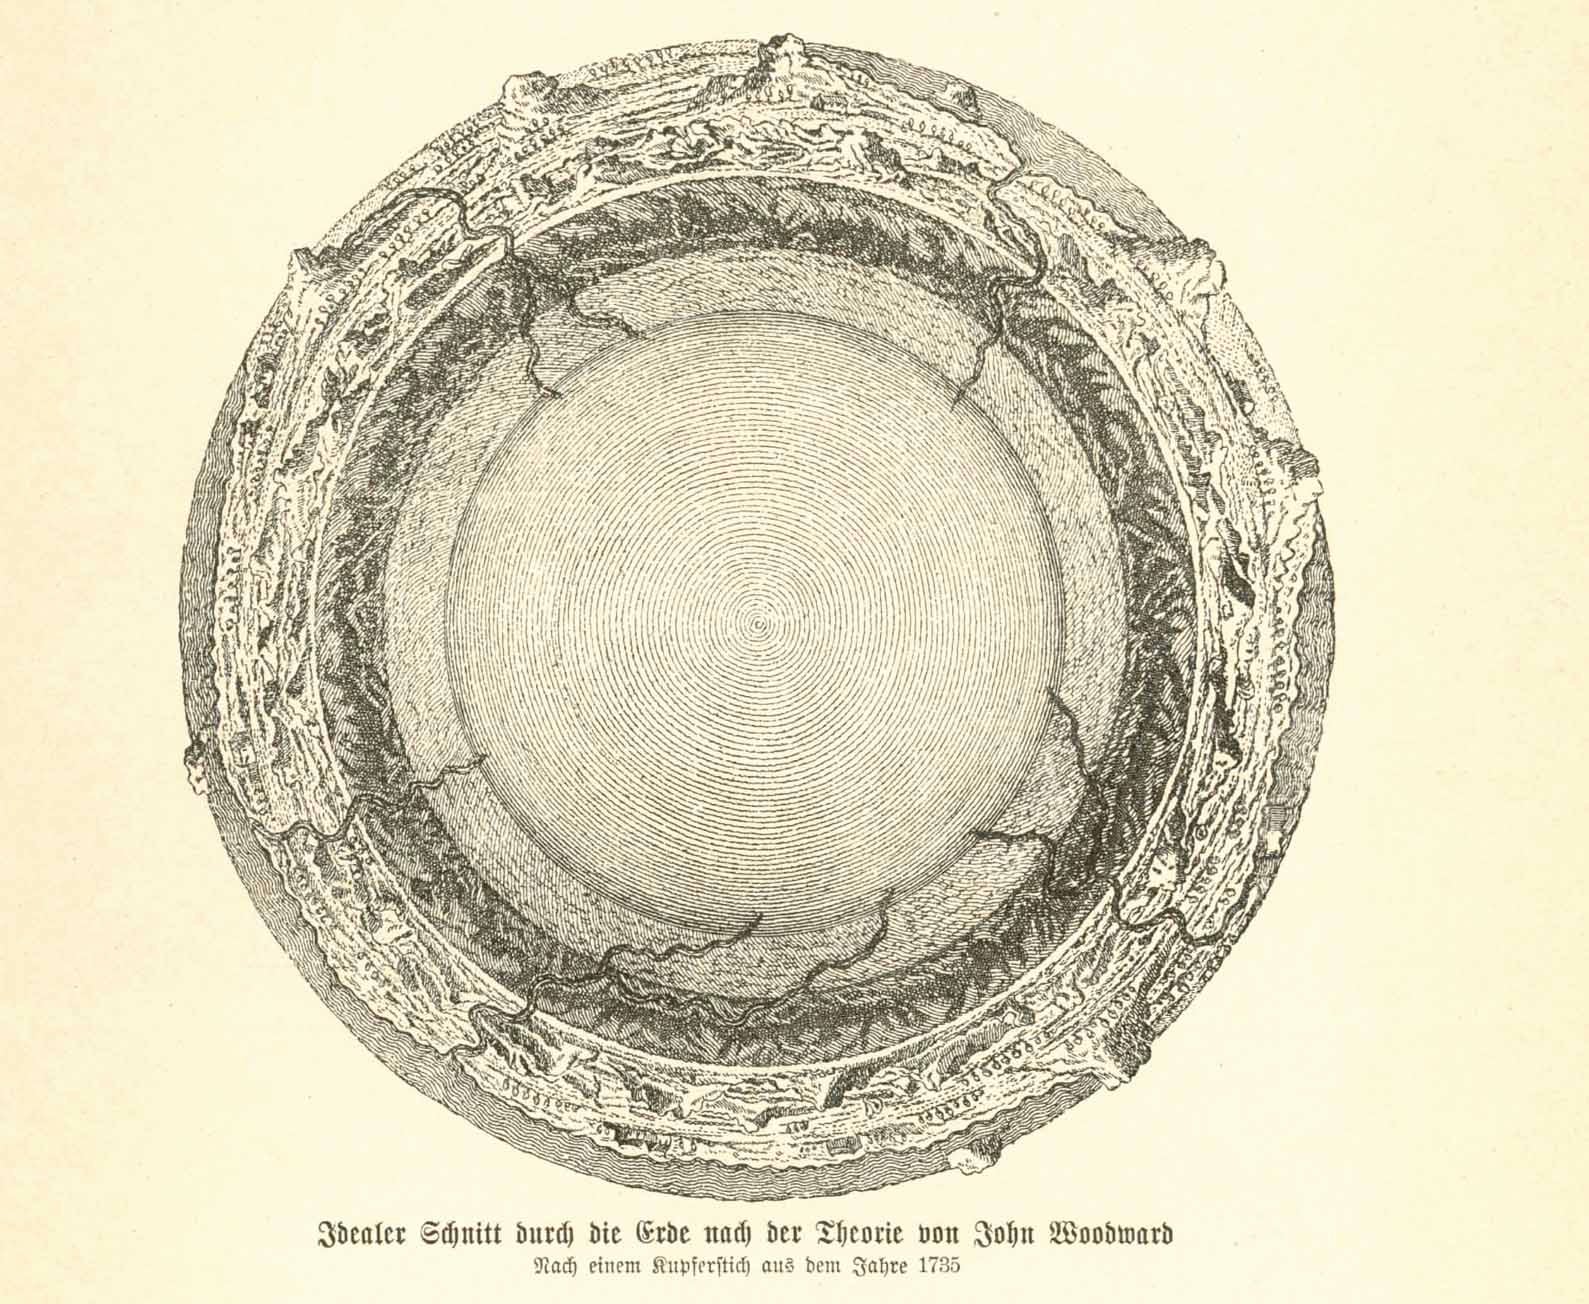 "Idealer Schnitt durch die Erde nach der Theorie von John Woodwrd" ( Cross-section of the earth according to the theory of John Woodward)  Wood engraving on a page of text. made after an earlier copper engraving published ca 1900. The text about John Woodward continues on the reverse side with text about William Whiston, Leibnitz, etc. and a small image of Graf Buffon.  Original antique print  